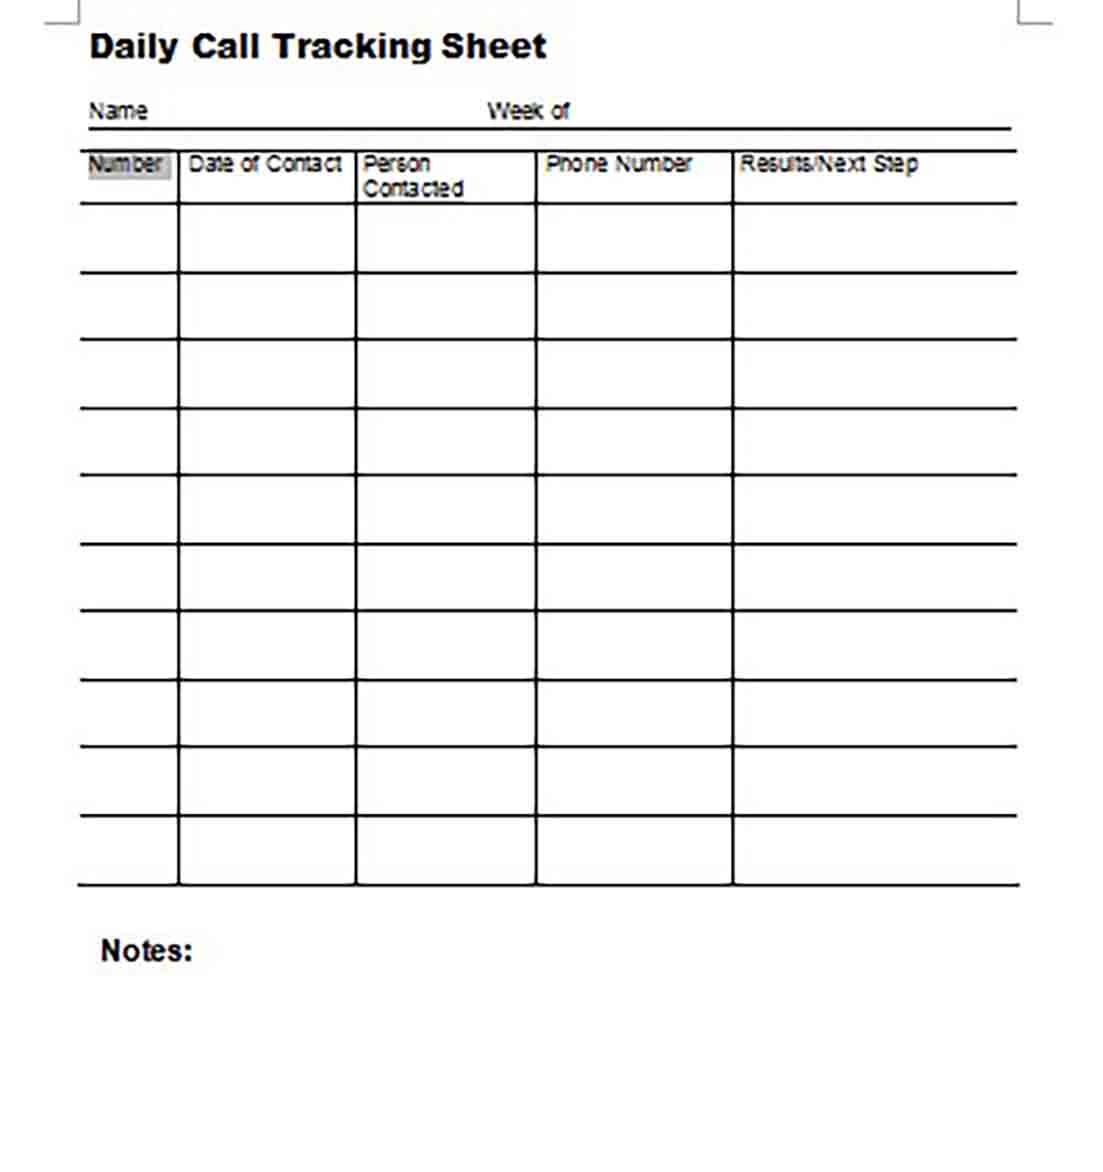 Daily Call Tracking Sheet templates